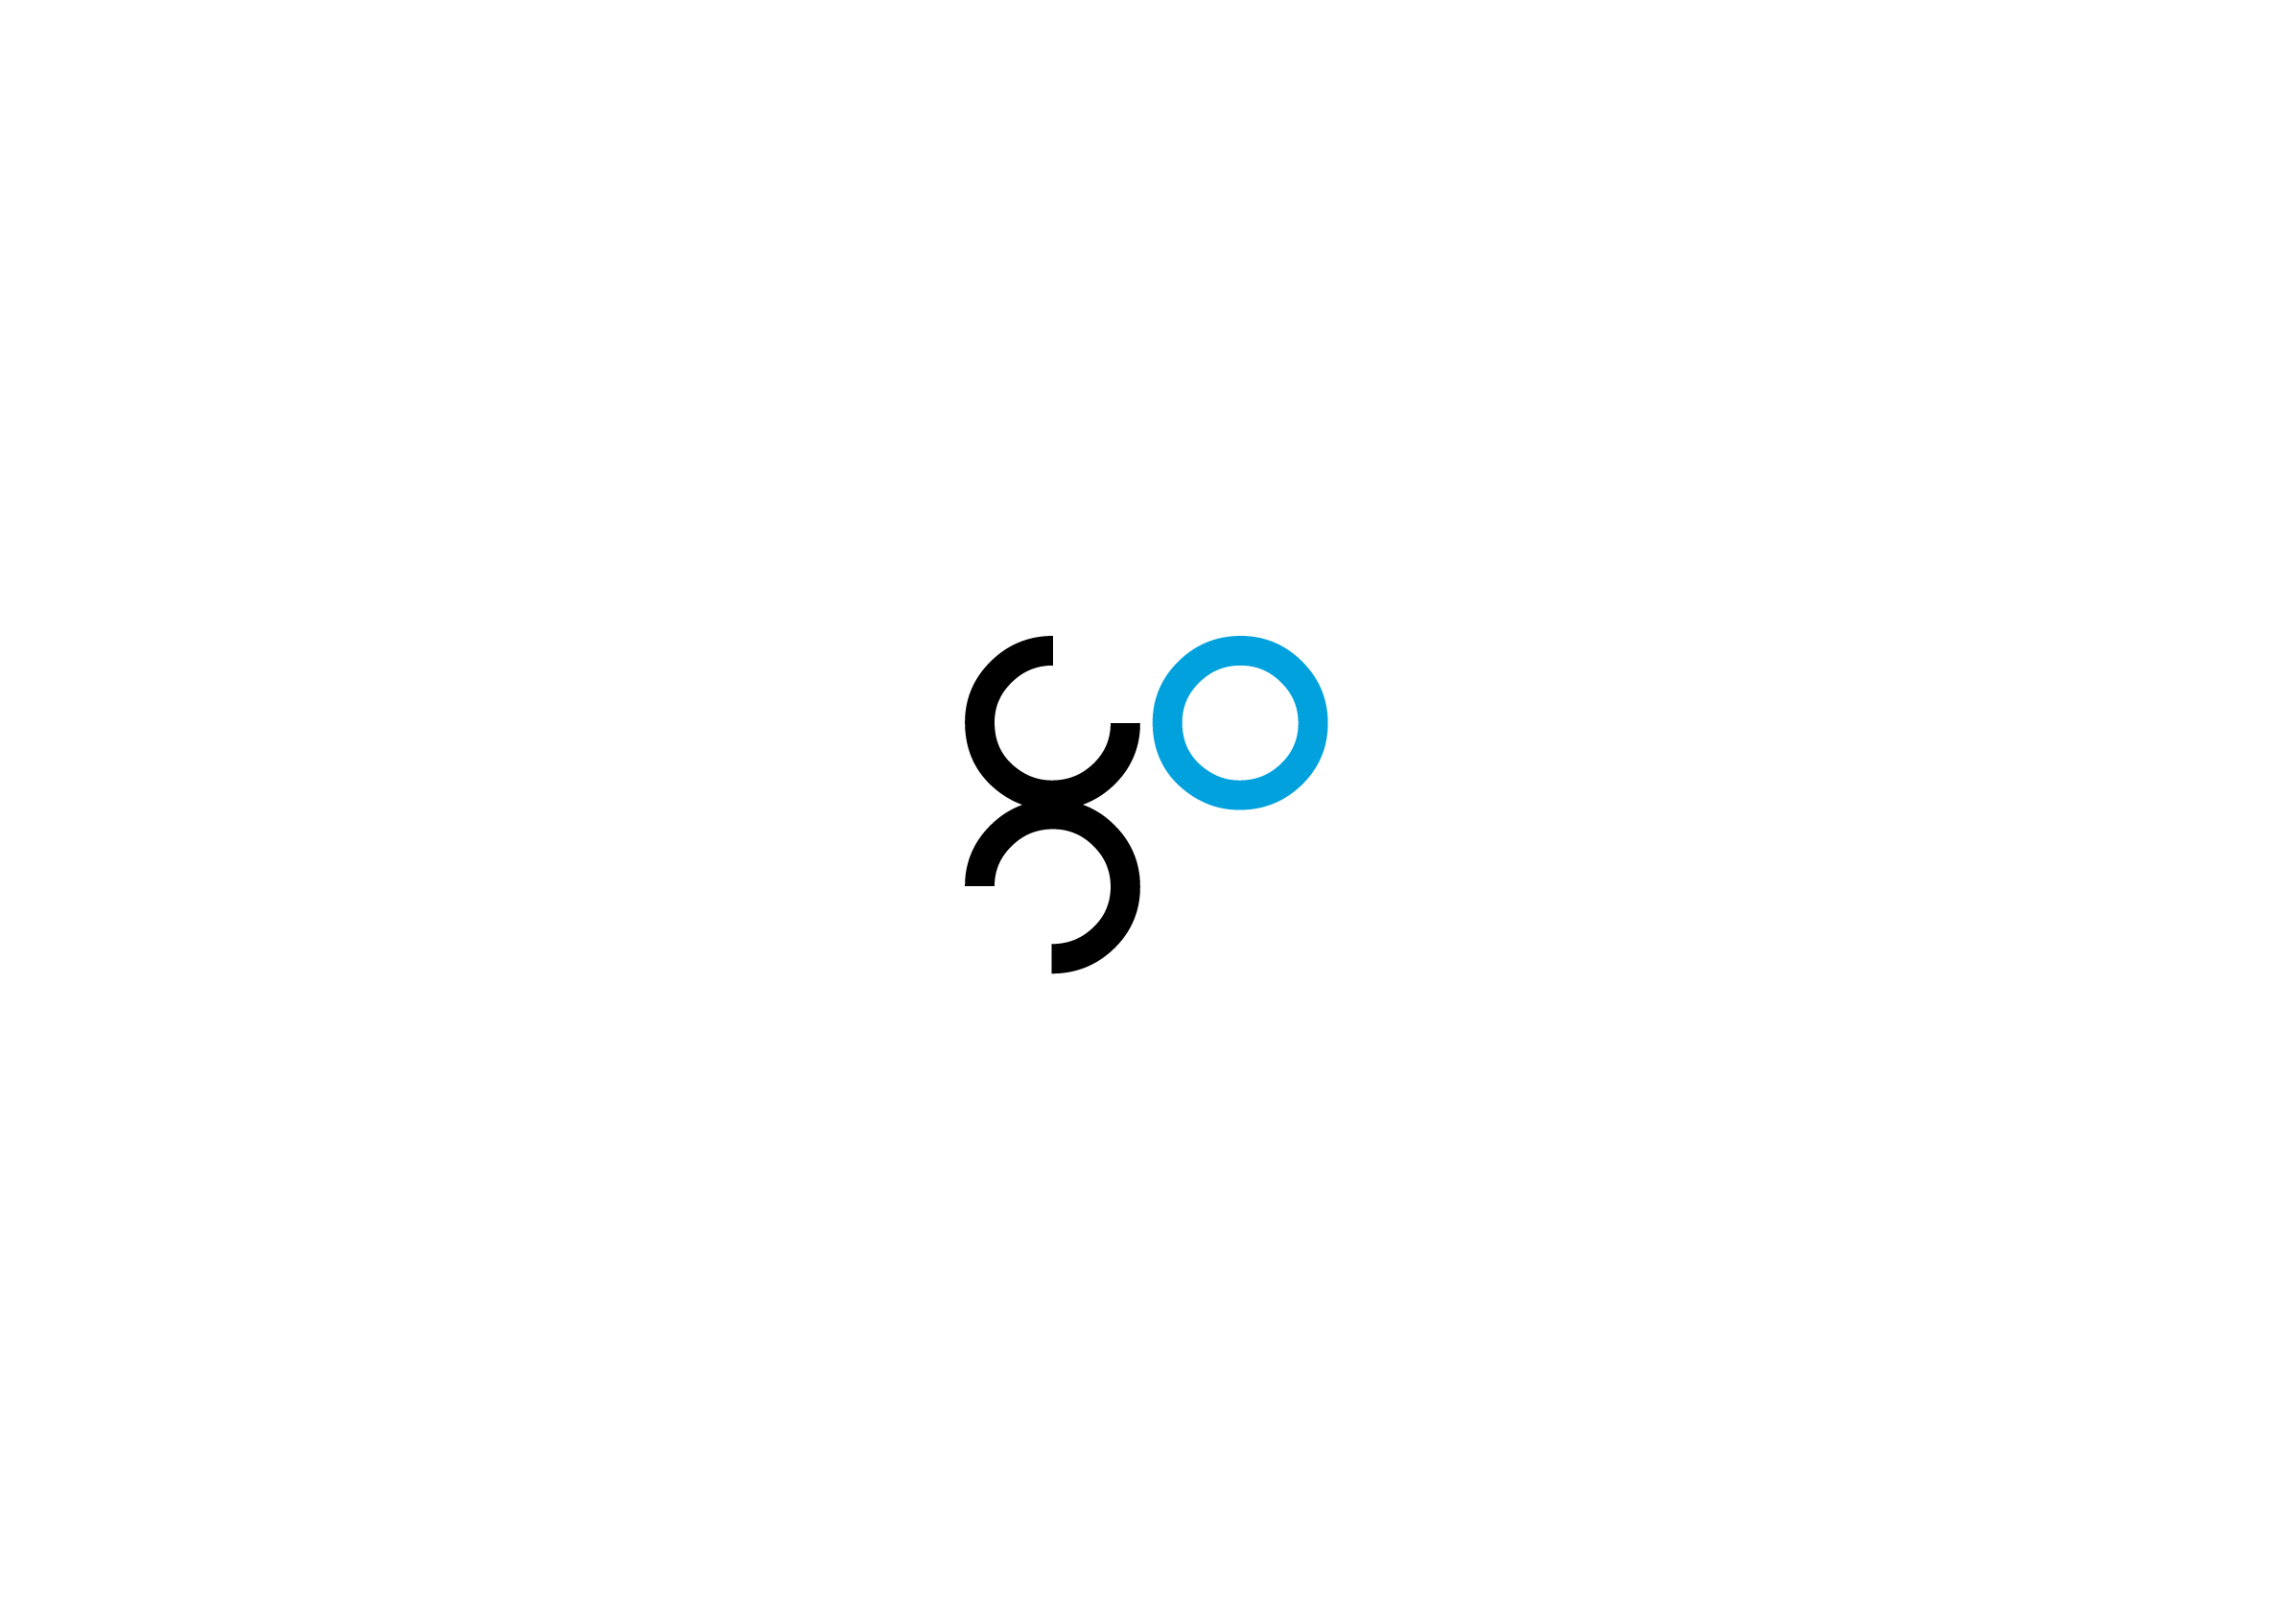 Symbol for Global Campus Education Consultants, a student recruitment company by Ottawa Graphic Designer idApostle